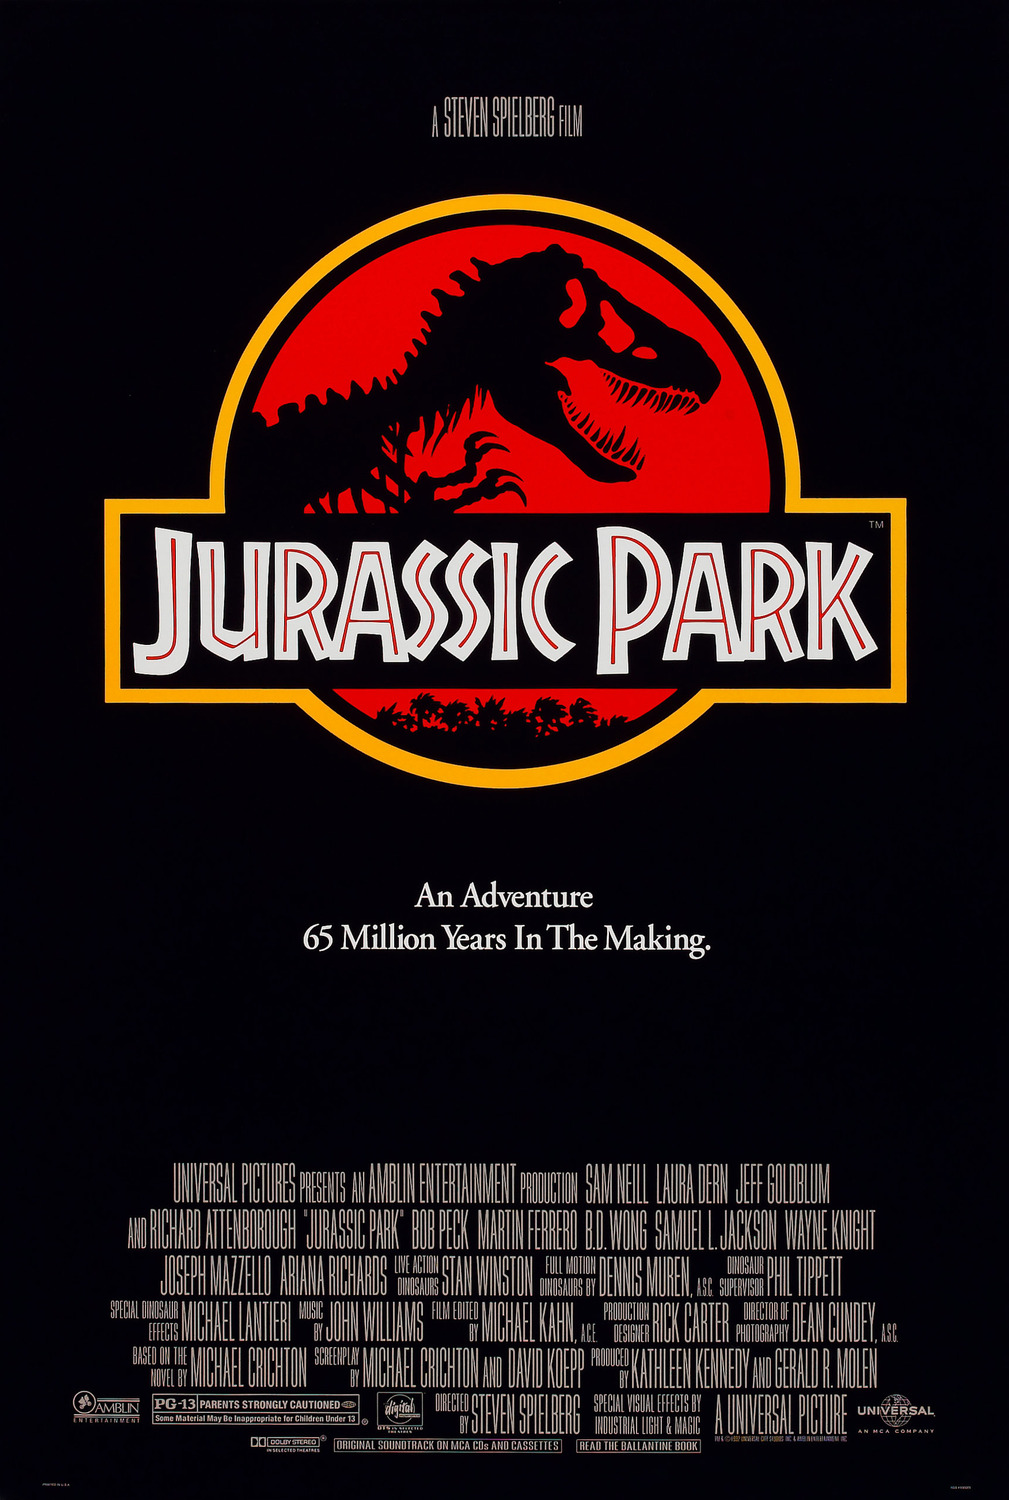 Important Pop Culture My 40 Favorite Films Of The 90s 34 Jurassic Park 1993